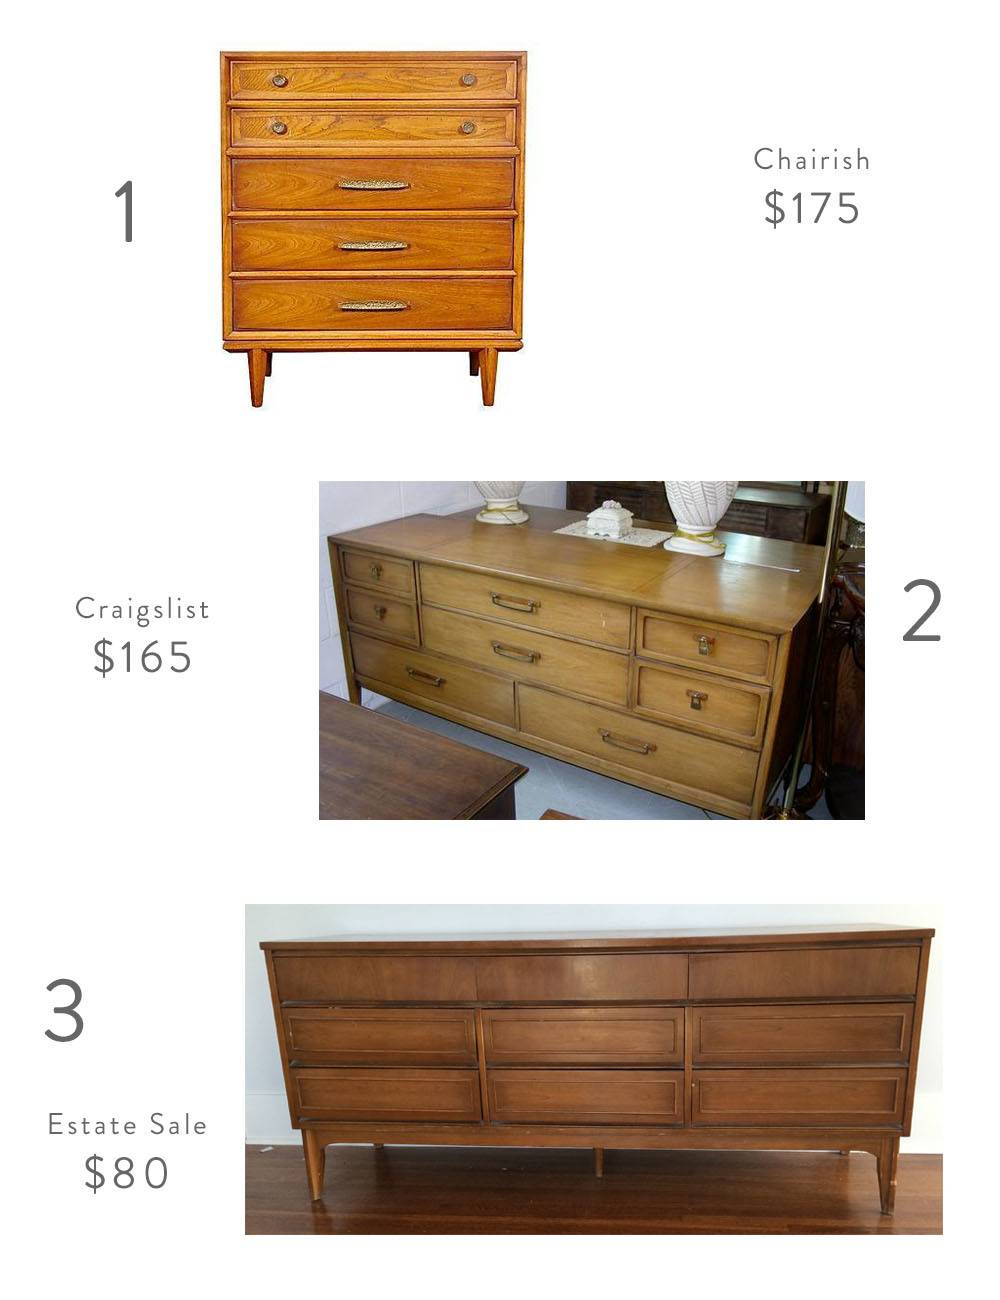 Shopping Guide: Mid Century Furniture and Acessories